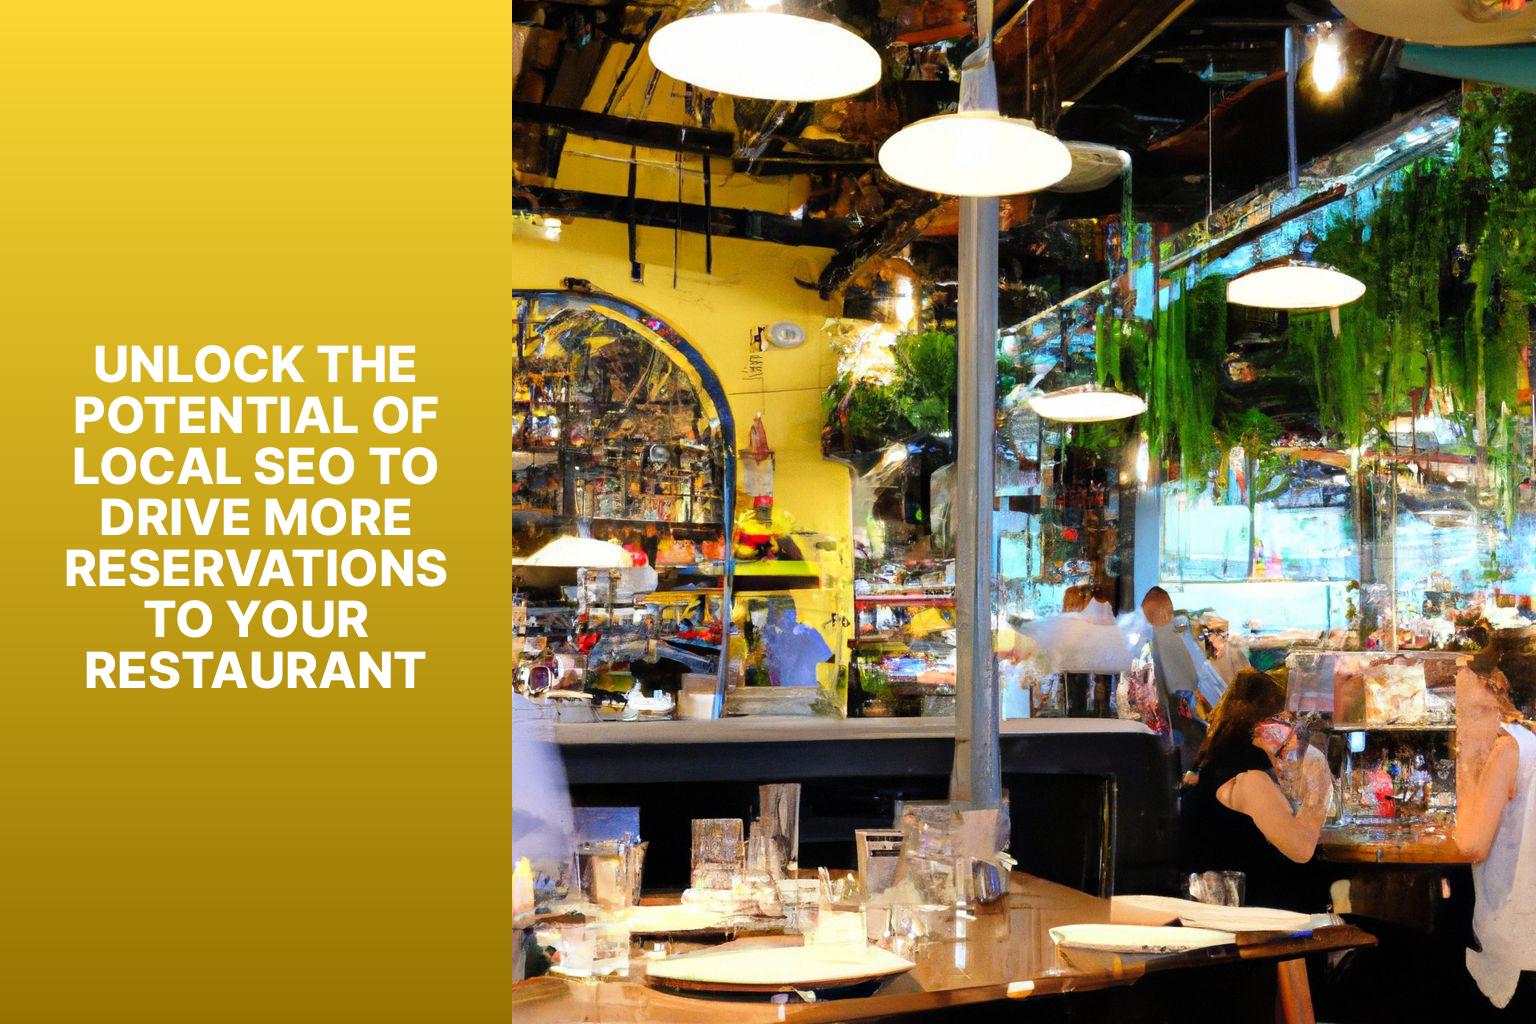 Unlock the Potential of Local SEO to Drive More Reservations to Your Restaurant